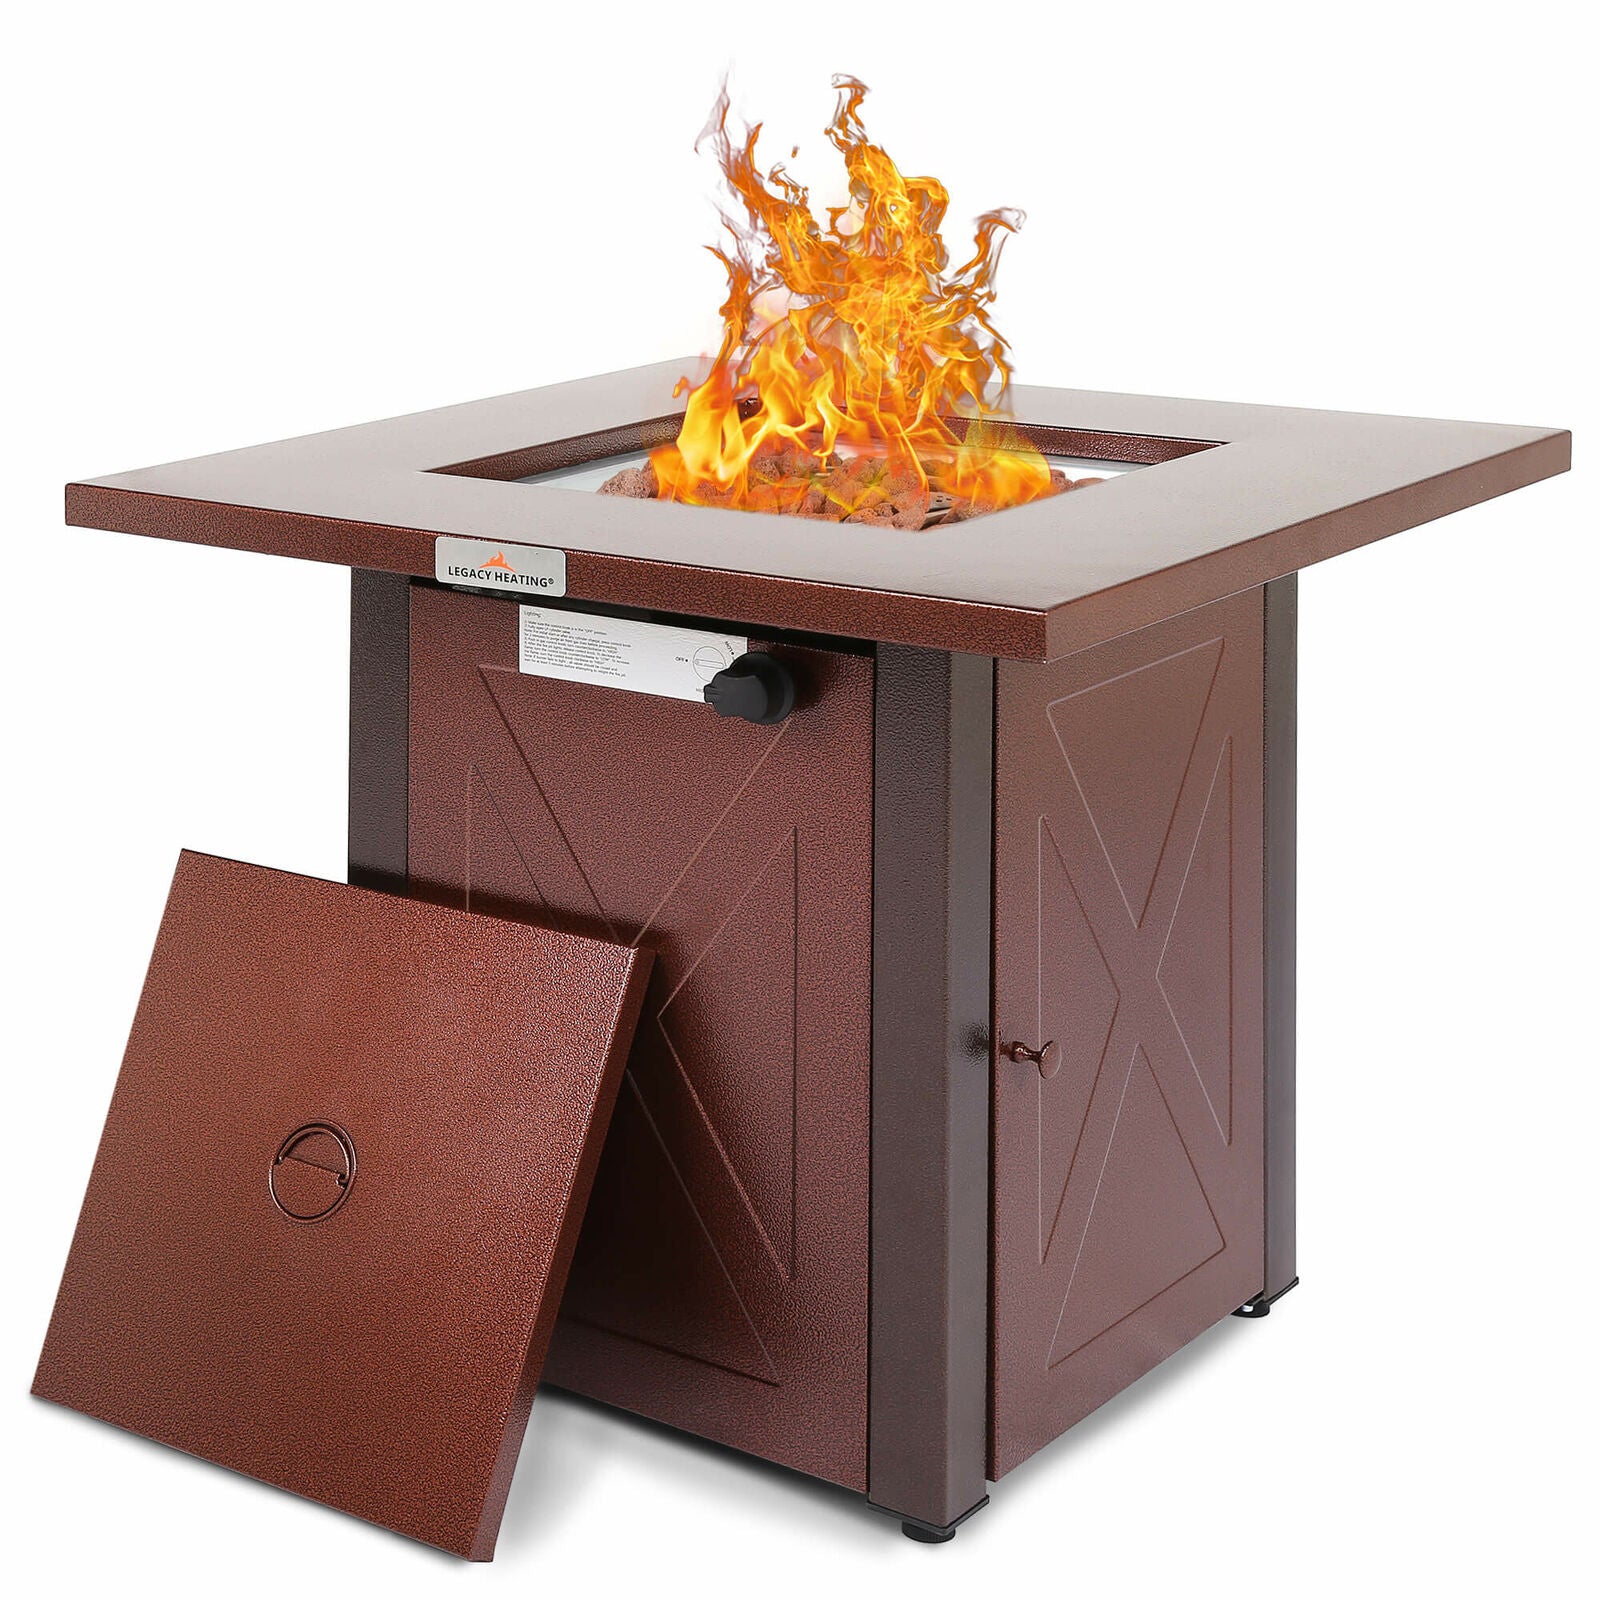 Legacy Heating, Legacy Heating 48,000 BTU Propane Outdoor Fire Pit Table with Lava Stones Wood Look New